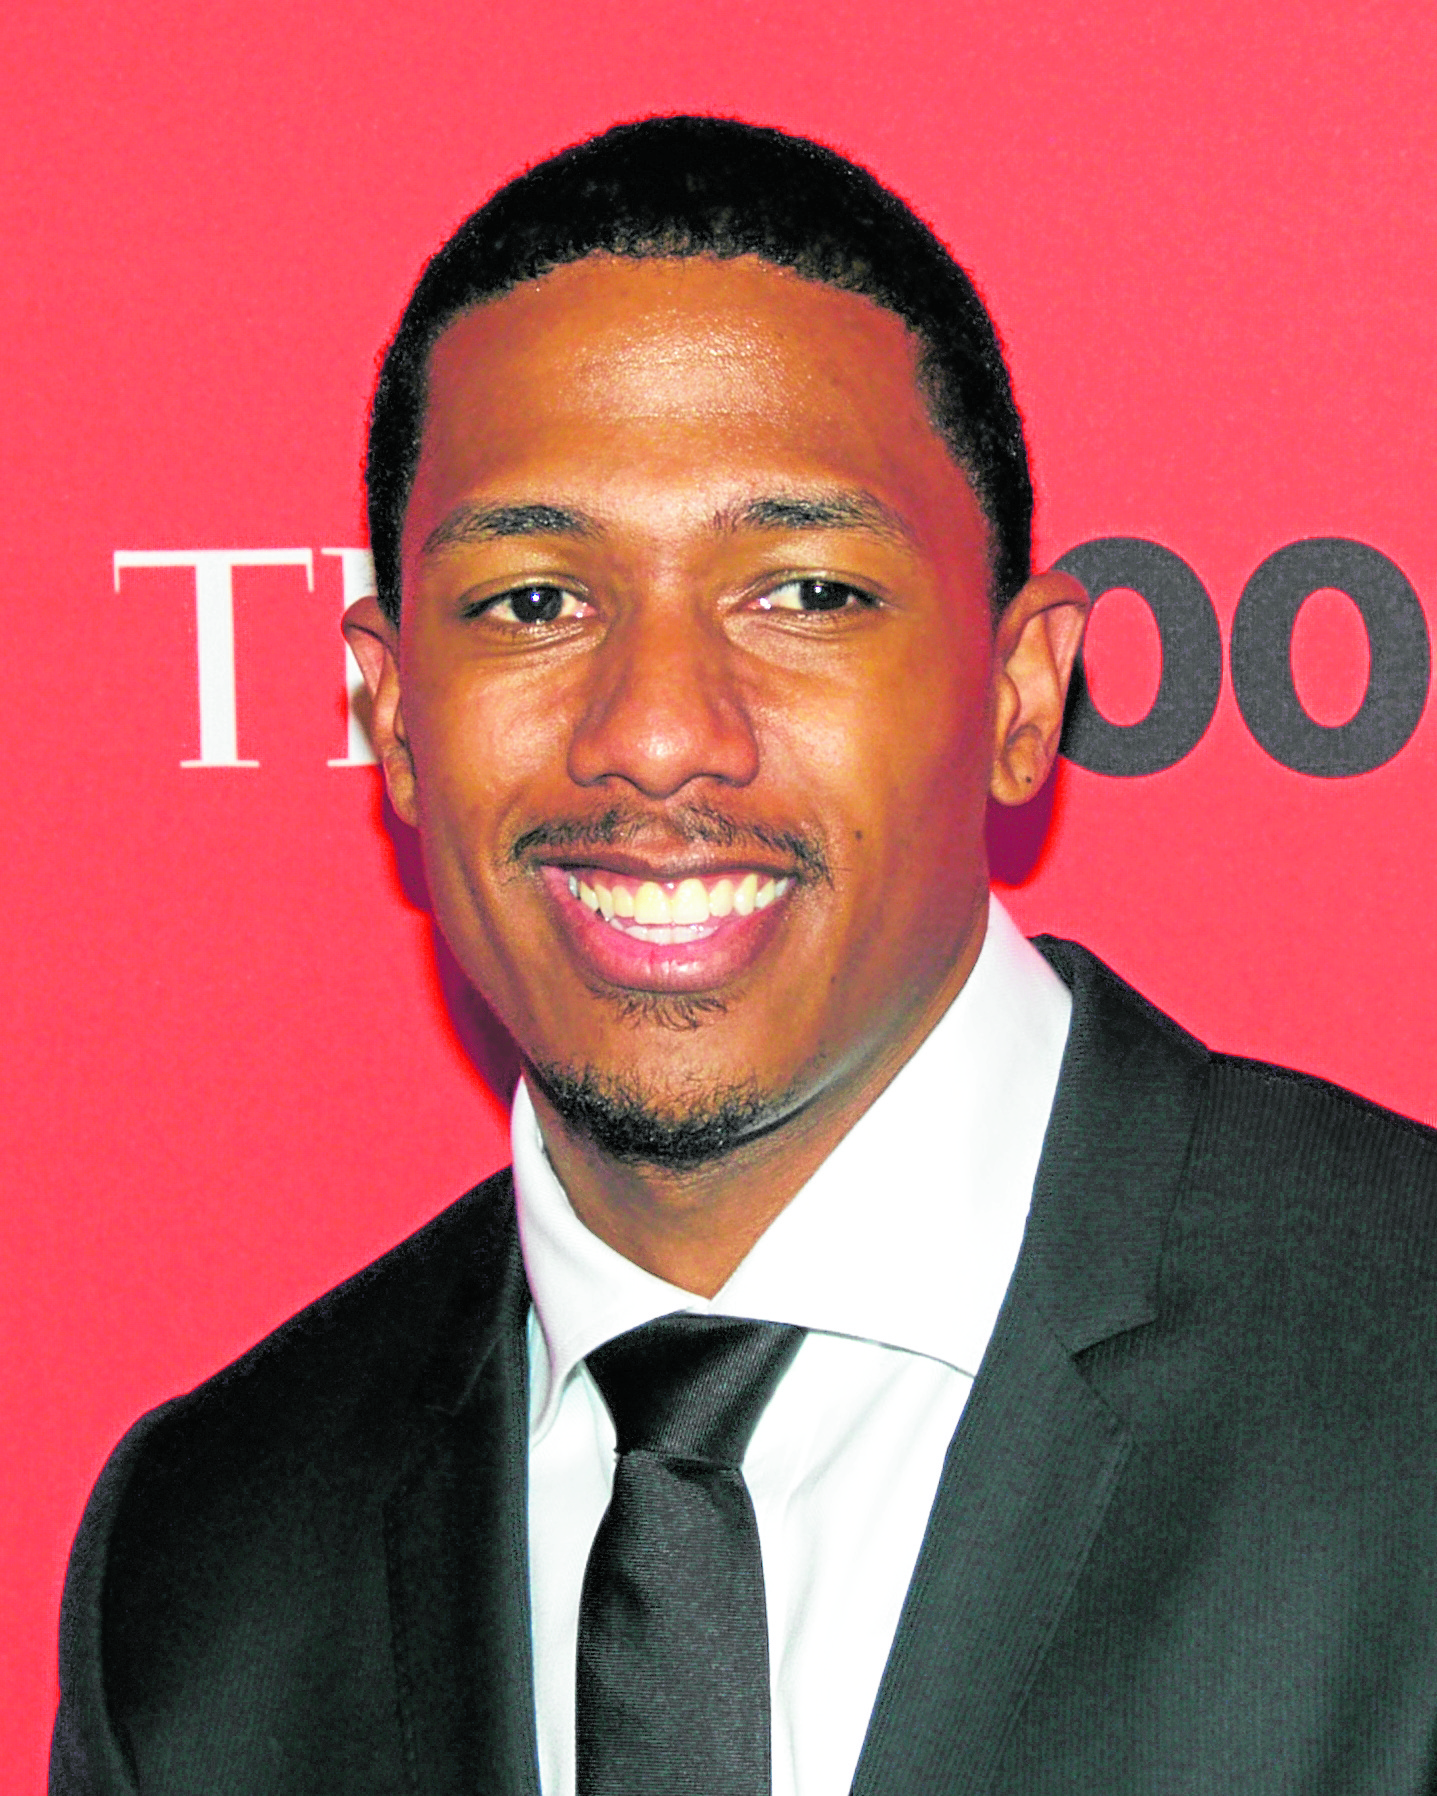 Nicholas scott nick cannon (born october 8, 1980)1 is an american actor, co...